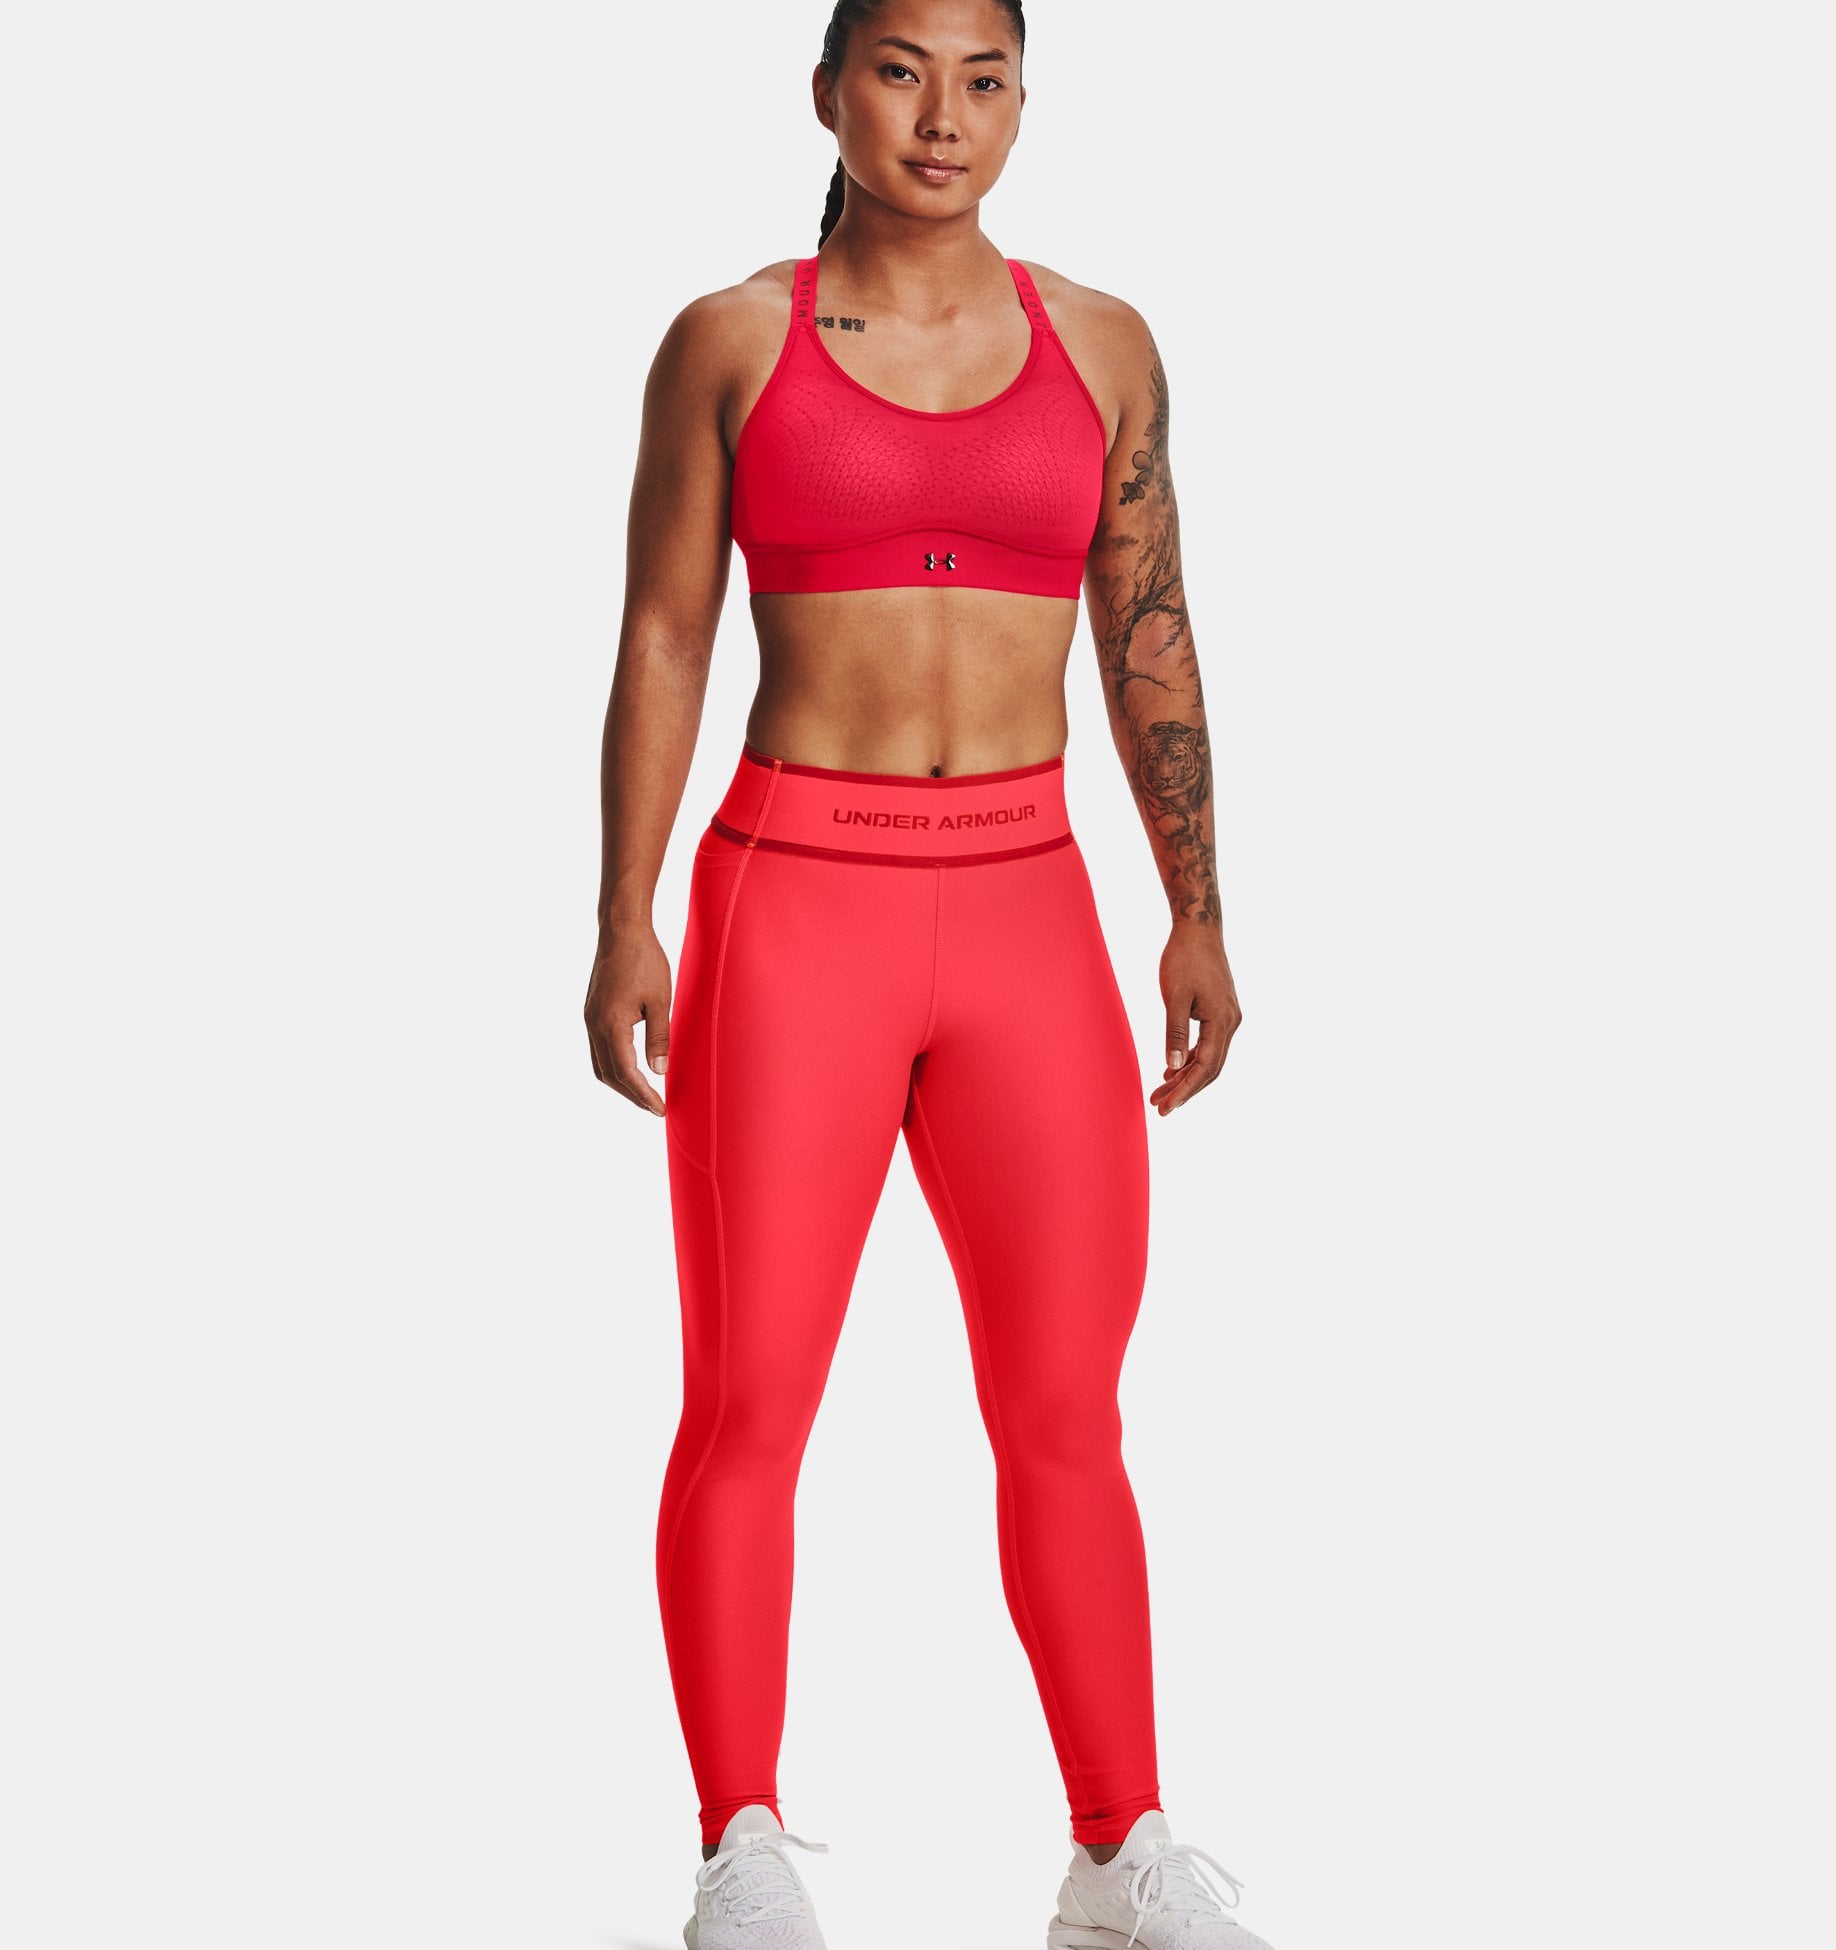 Under Armour Leggings Women YLG Youth Large Red HeatGear Rock Bull Fitted  Active